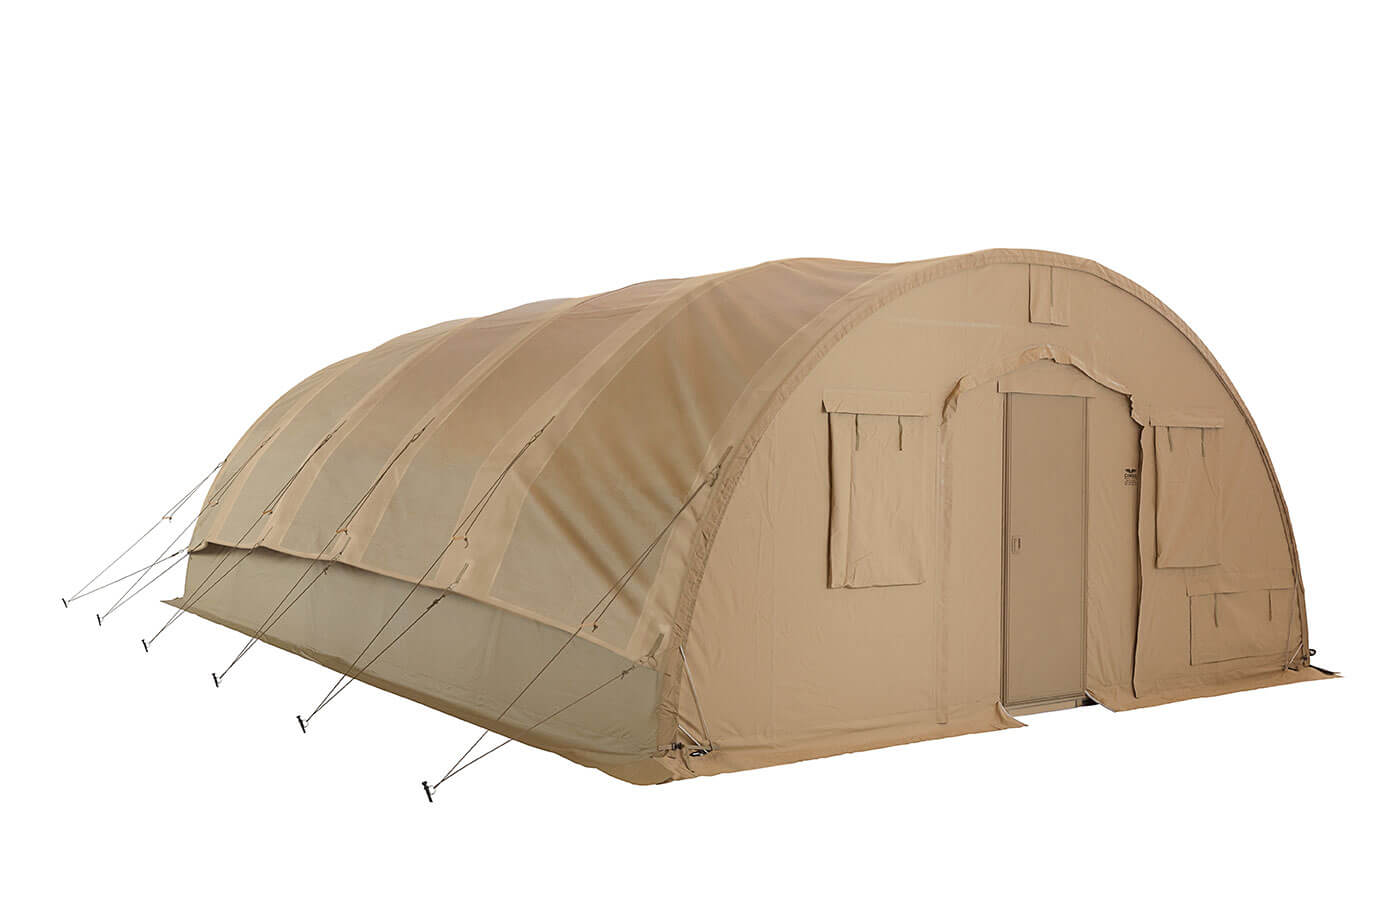 CAMSS Tan 20Q Small Military Shelter System With SolarFly